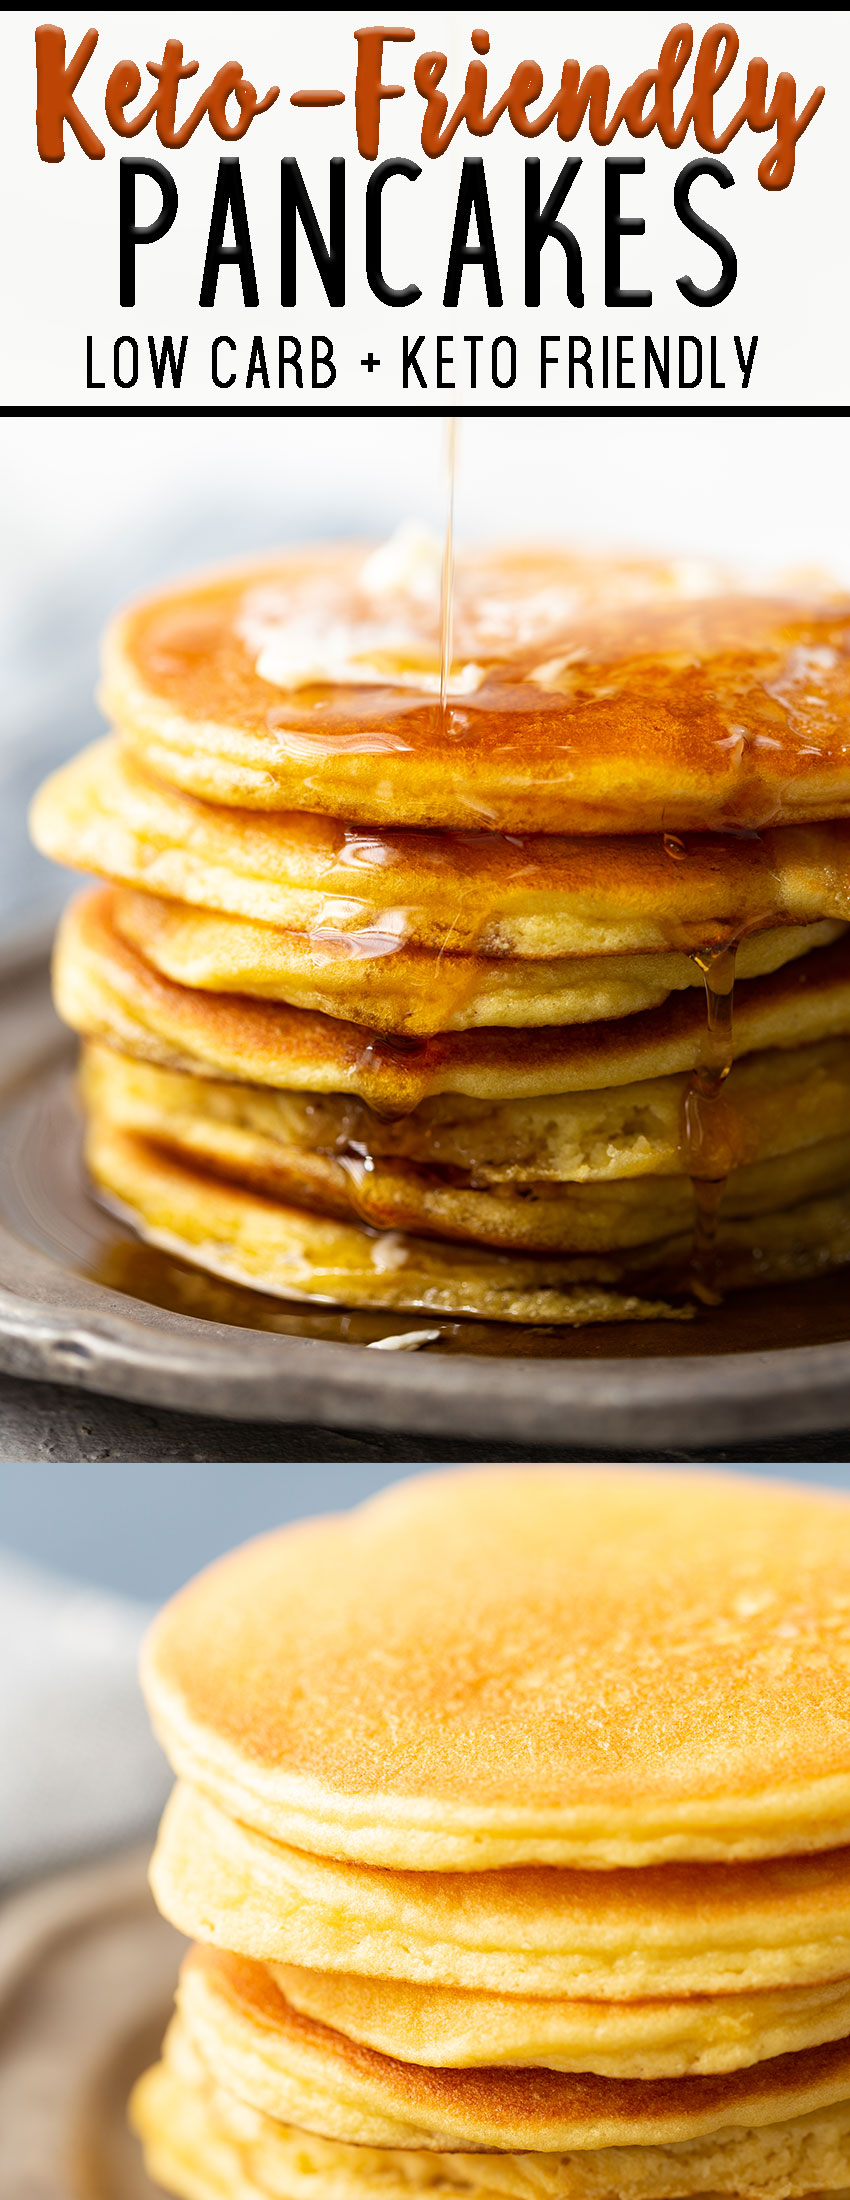 Keto Pancakes for a low carb diet- These amazing pancakes make eating low carb at breakfast so easy.